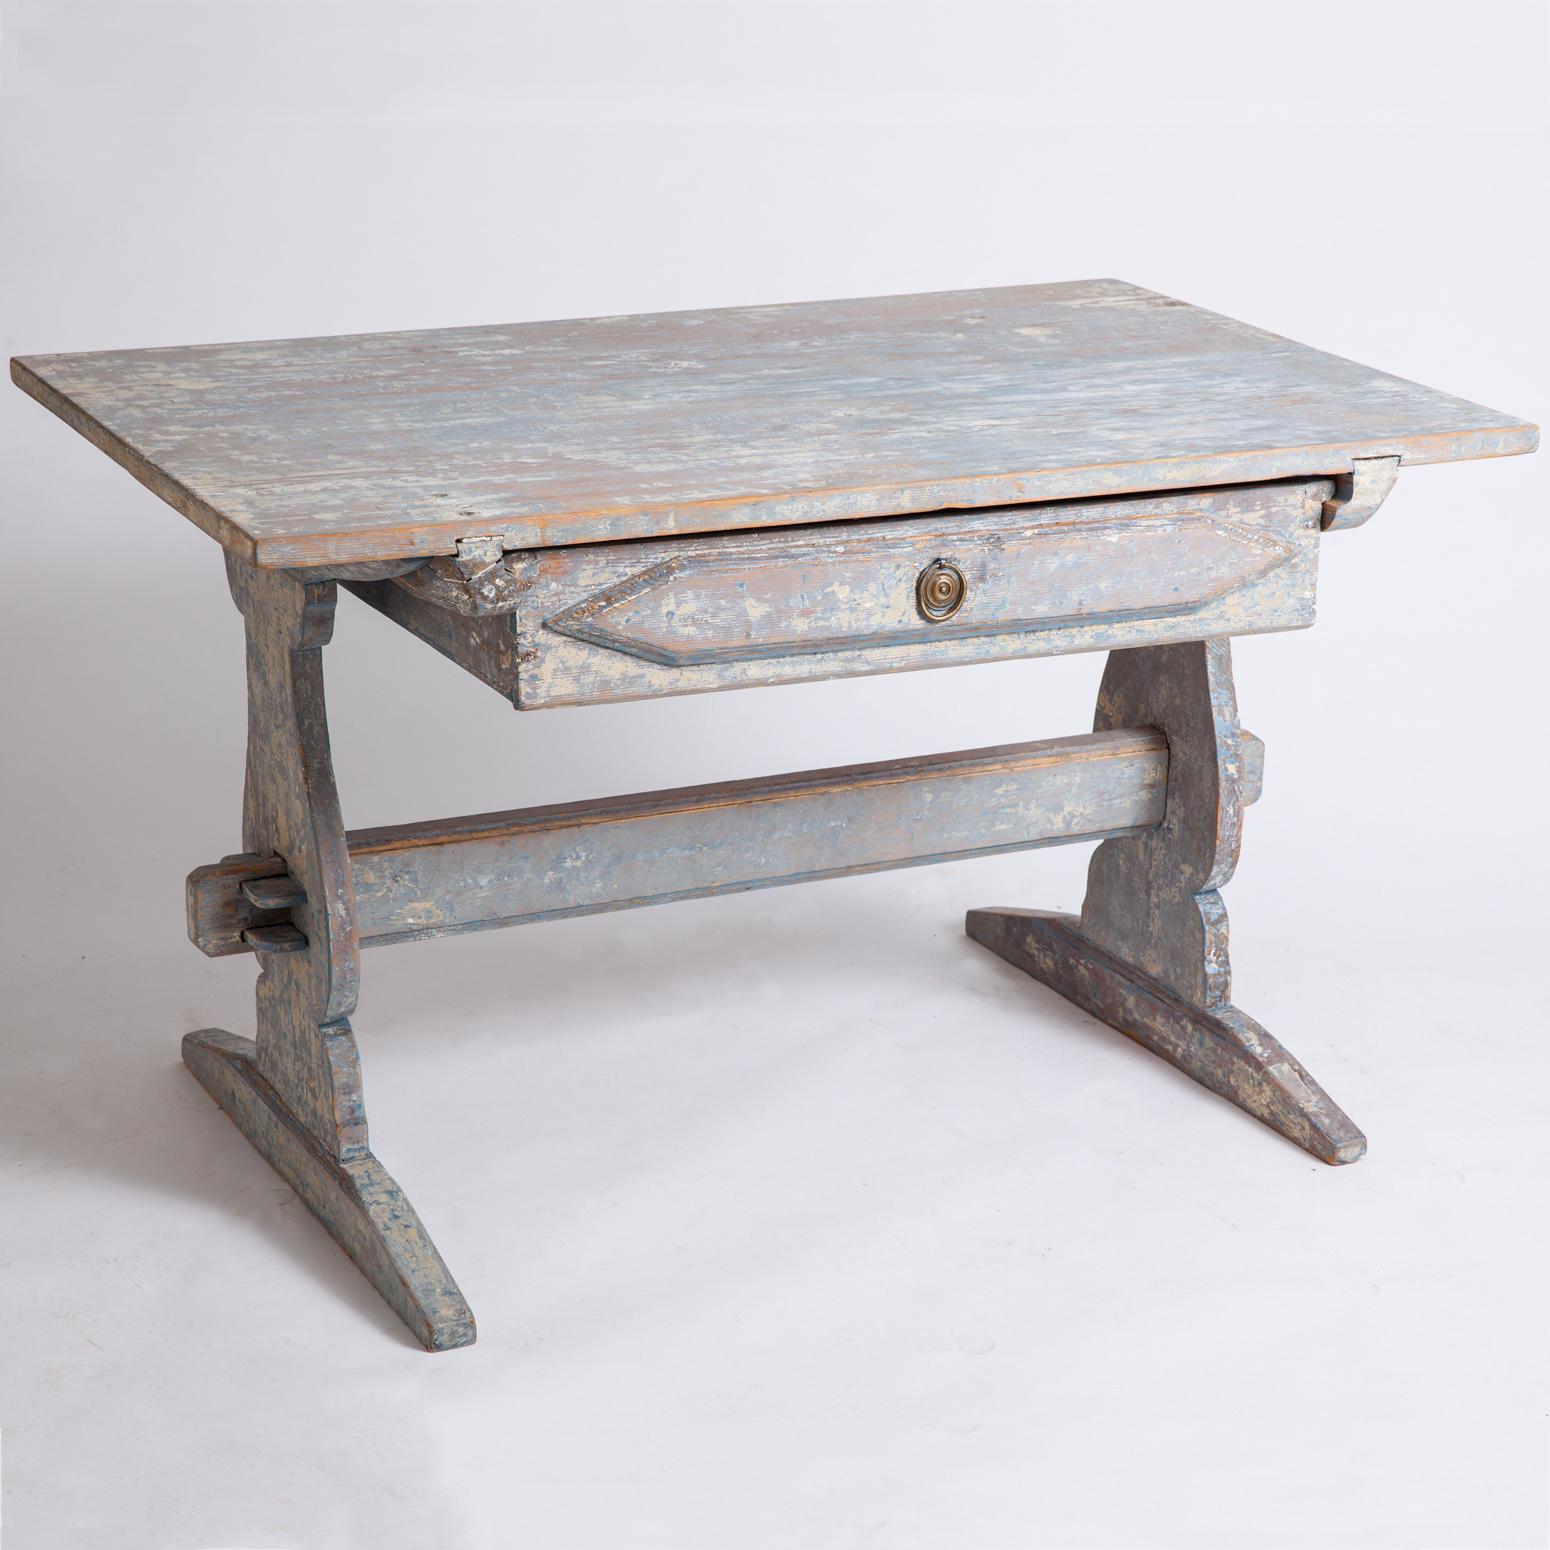 Swedish Antique Blue Painted Trestle Table, circa 1880 For Sale 2